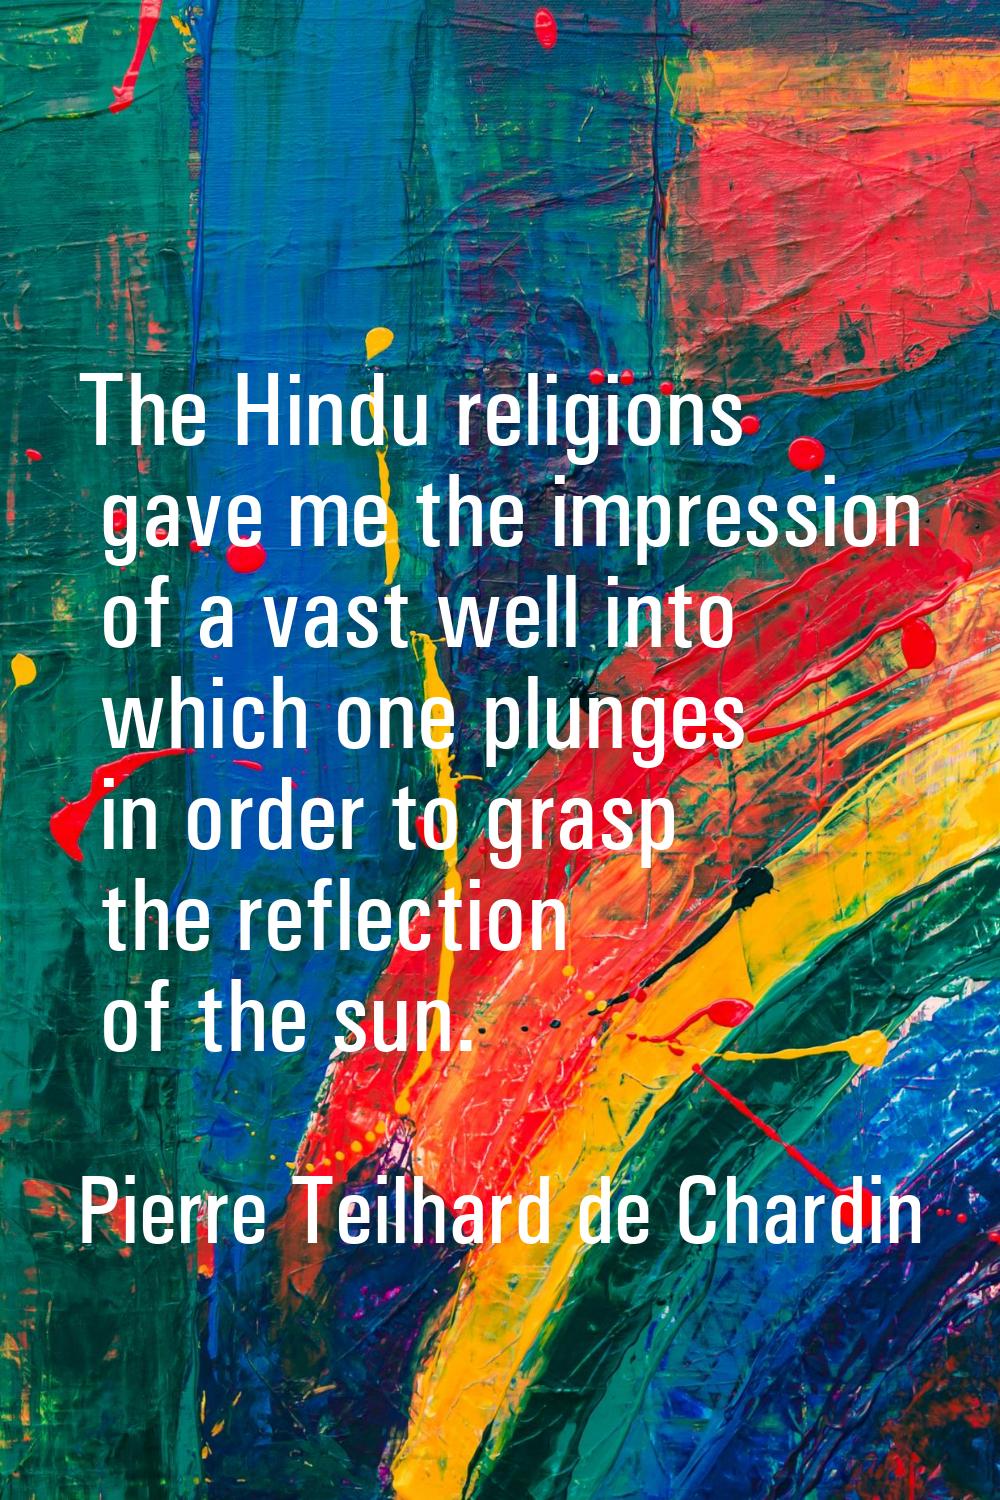 The Hindu religions gave me the impression of a vast well into which one plunges in order to grasp 